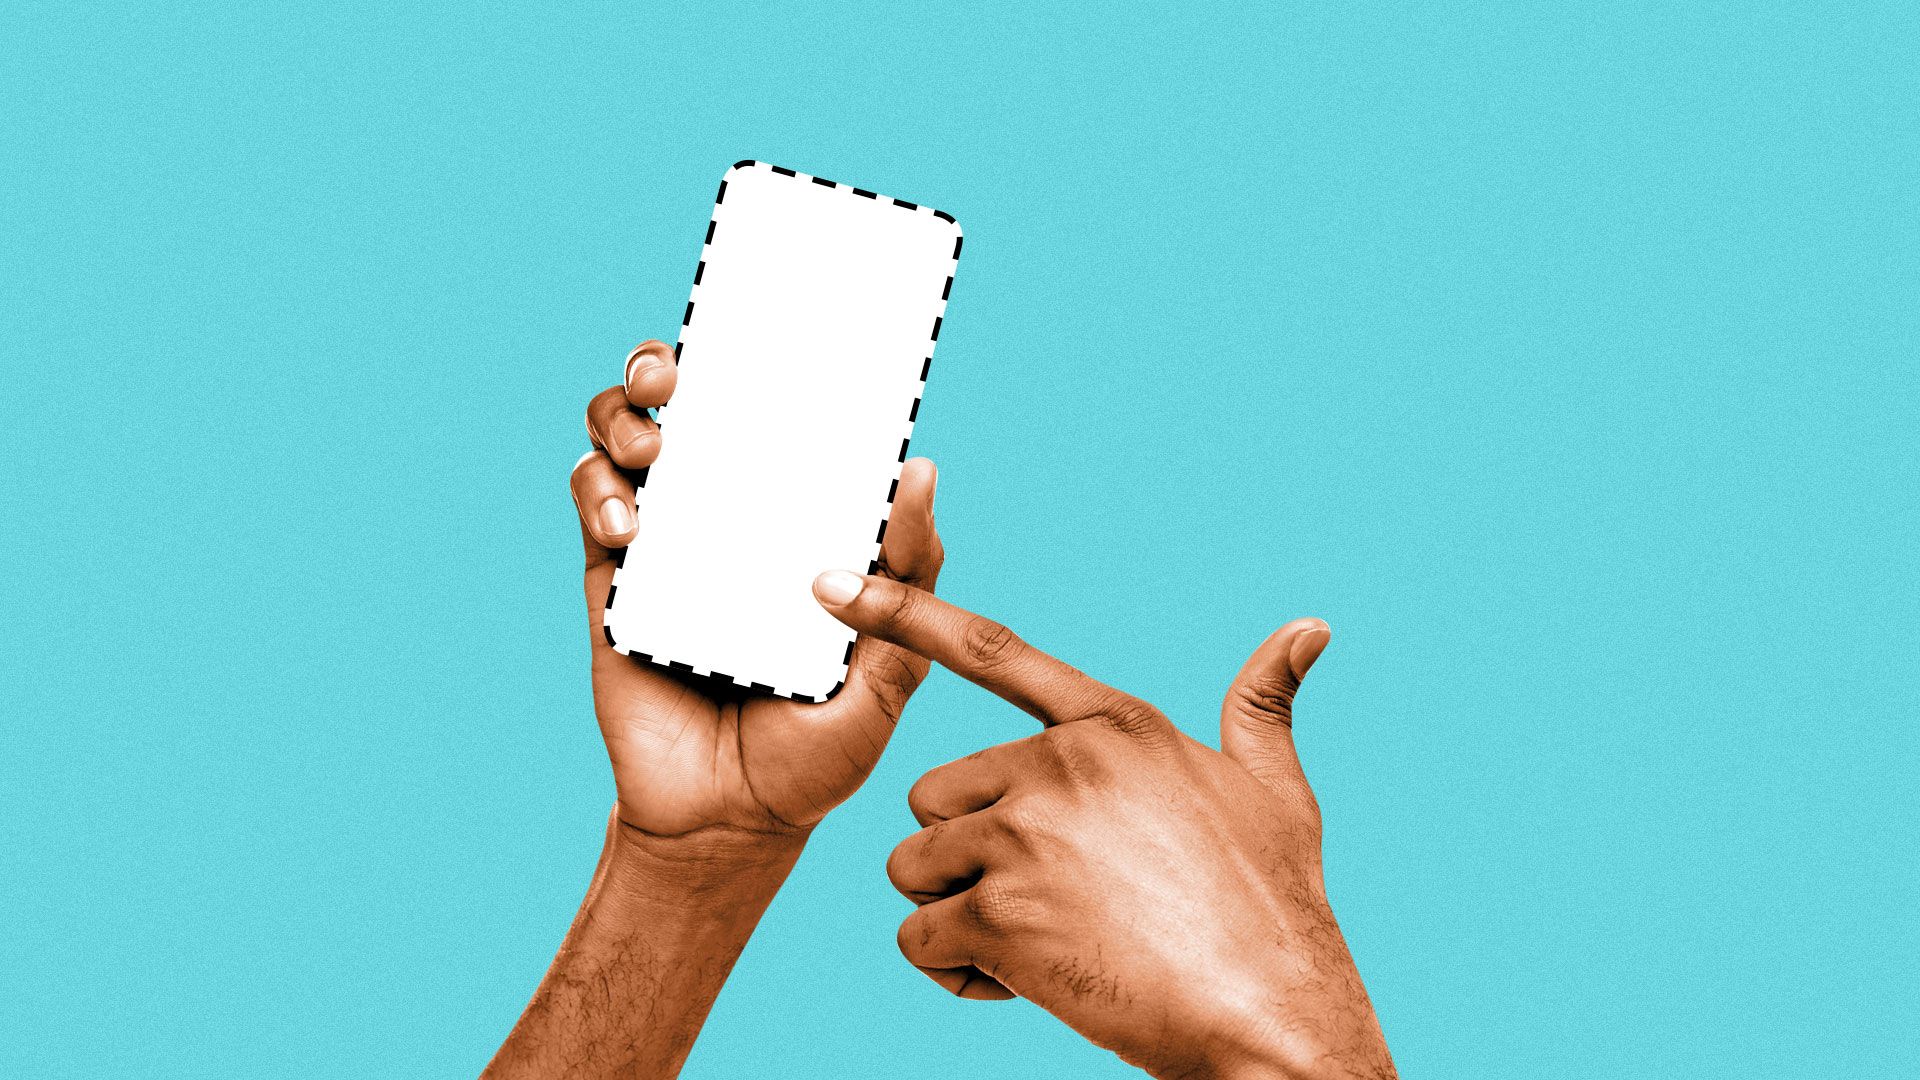 Illustration of hands holding a cut-out phone-shaped space.